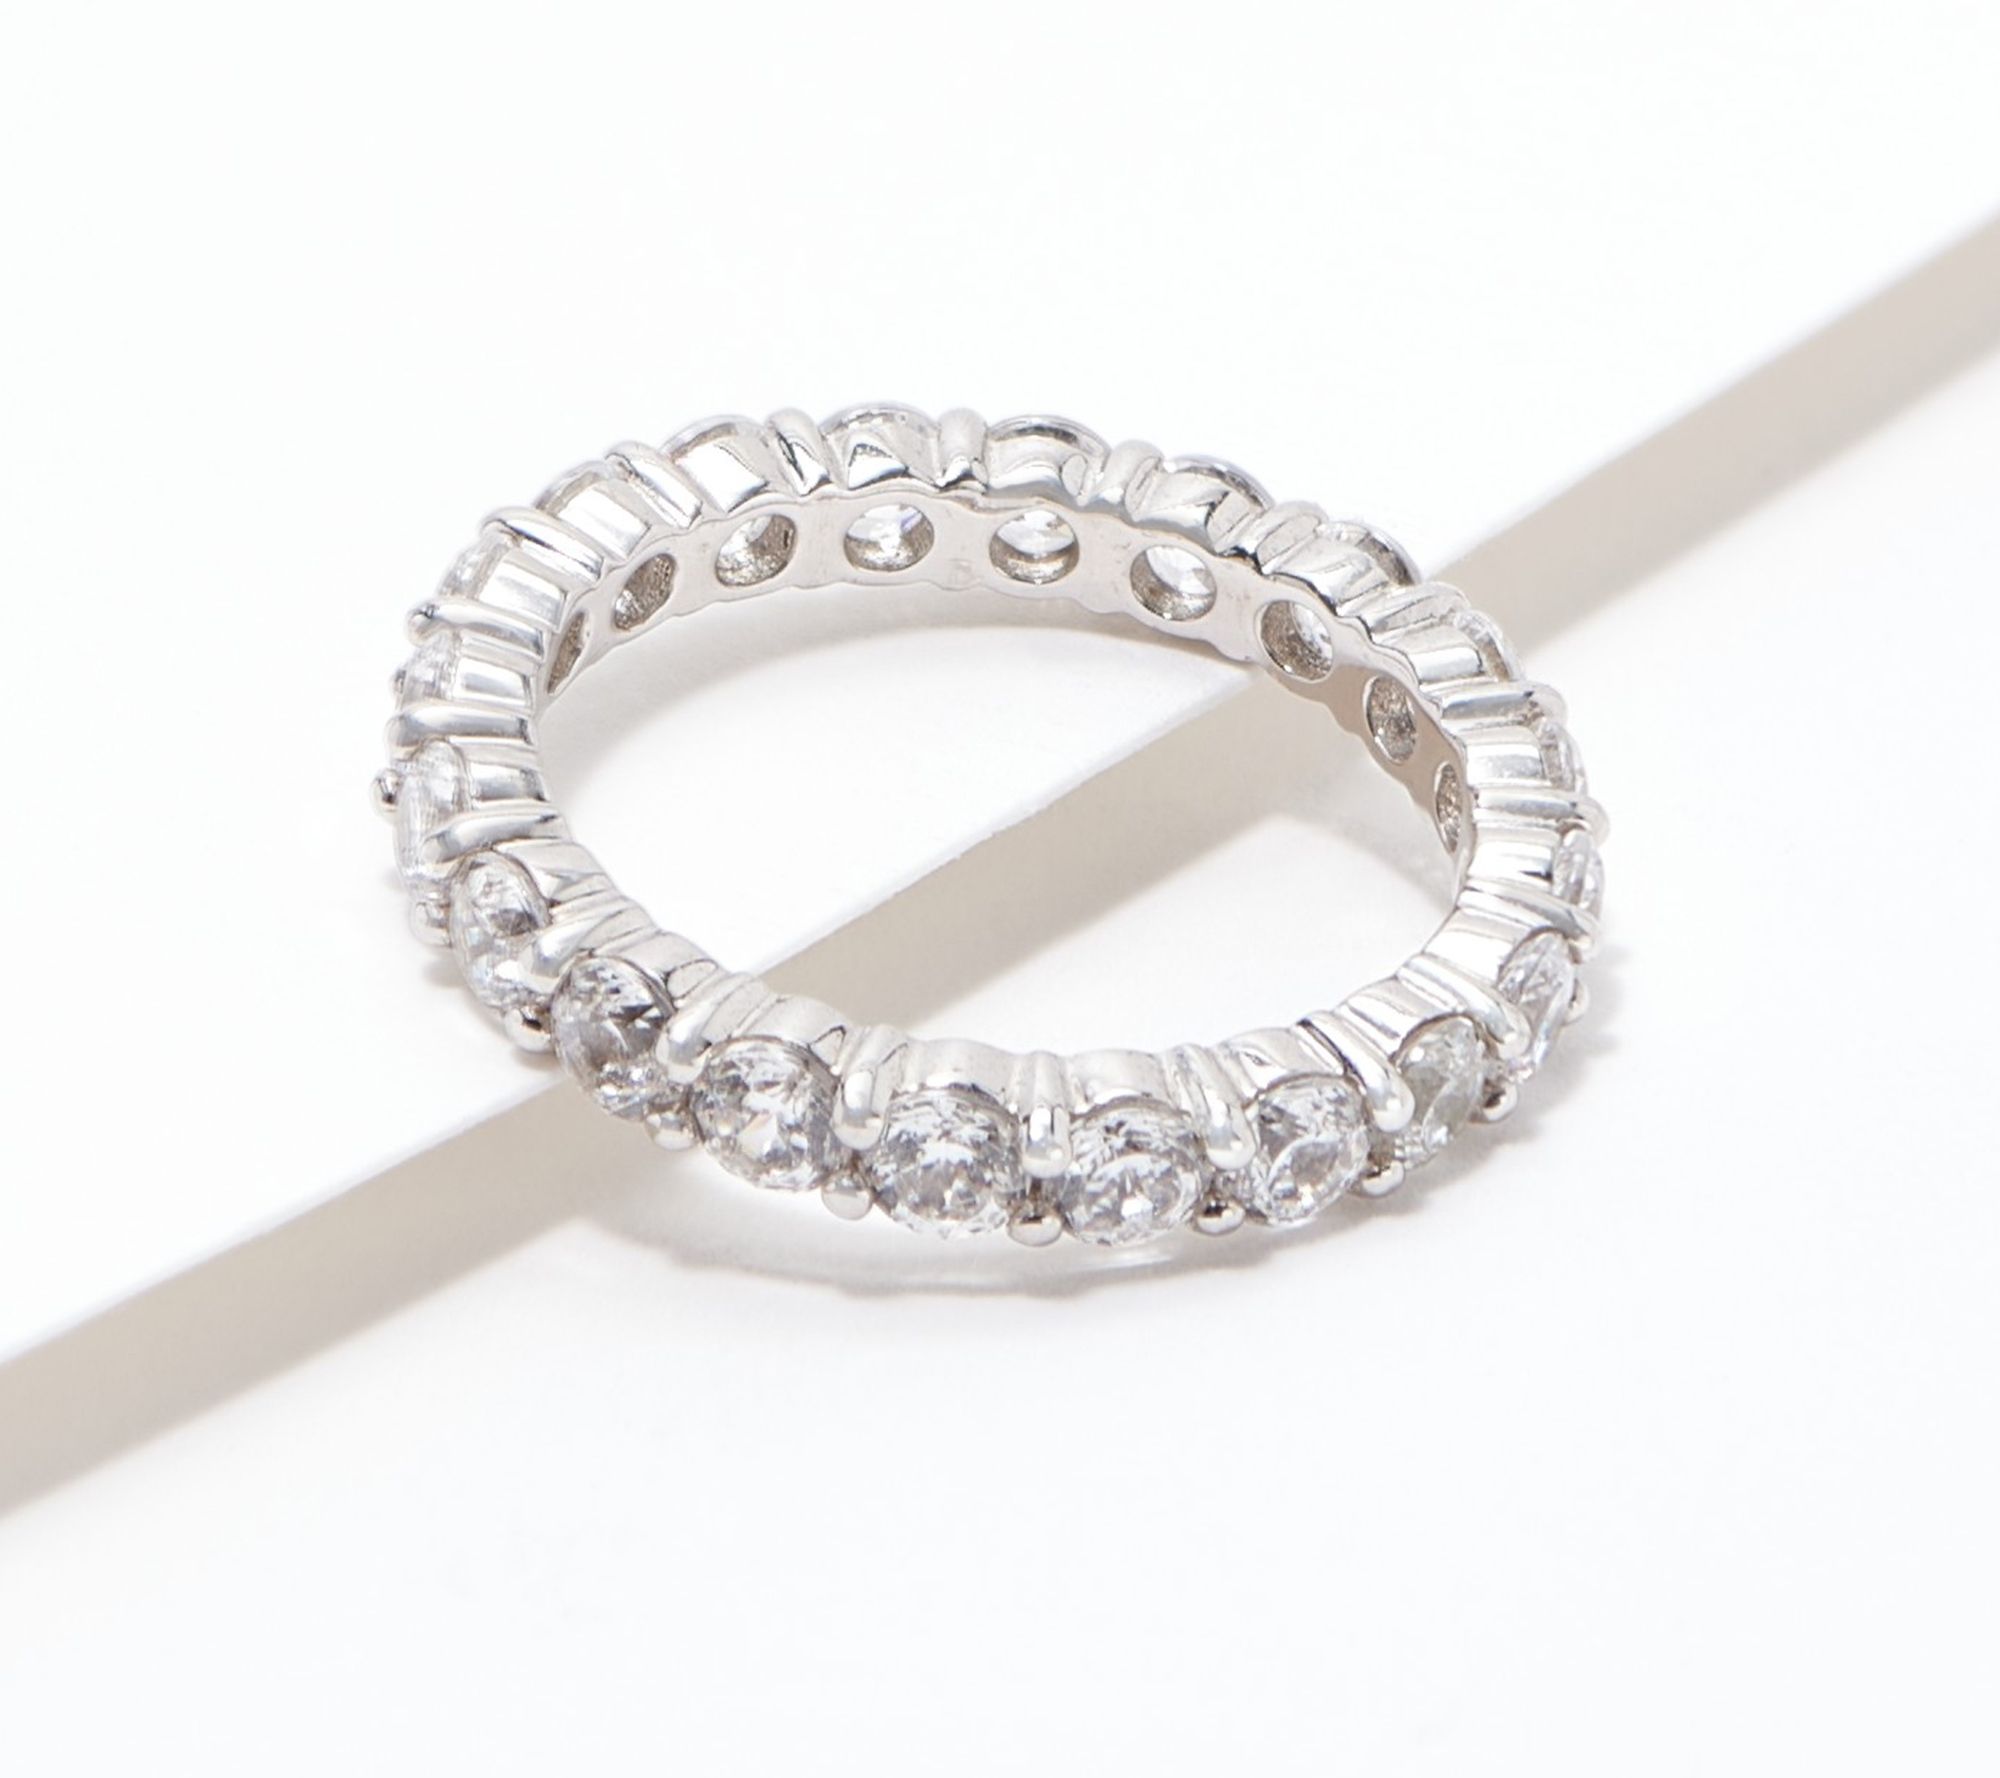 DESIGNER "SW" STERLING SILVER DIAMONIQUE STACKABLE CZ ROUND ETERNITY RING BAND 